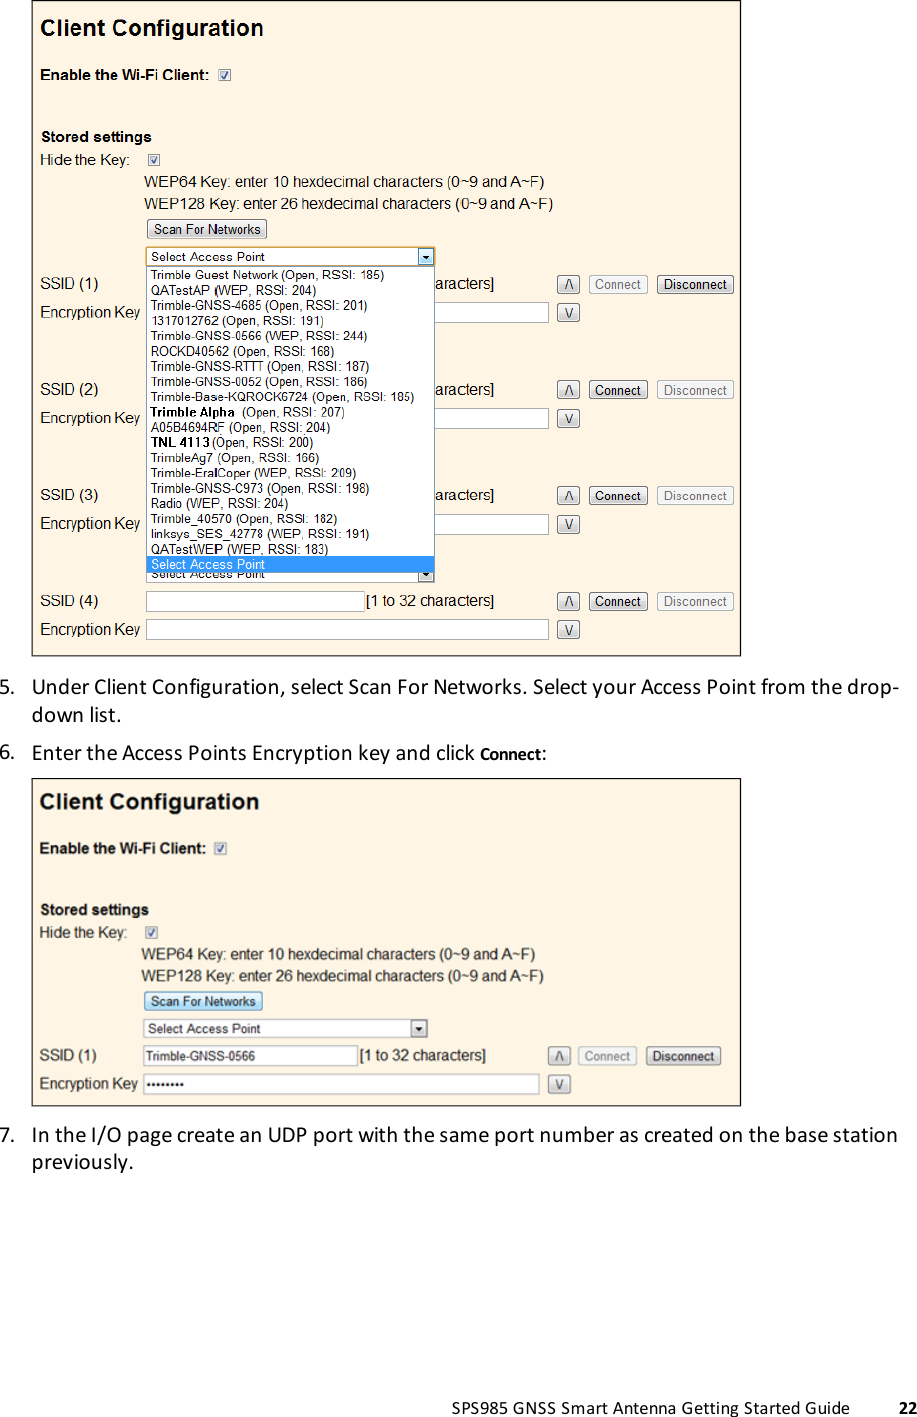 5. Under Client Configuration, select Scan For Networks. Select your Access Point from the drop-down list.6. Enter the Access Points Encryption key and click Connect:7. In the I/O page create an UDP port with the same port number as created on the base stationpreviously.SPS985 GNSS Smart Antenna Getting Started Guide 22